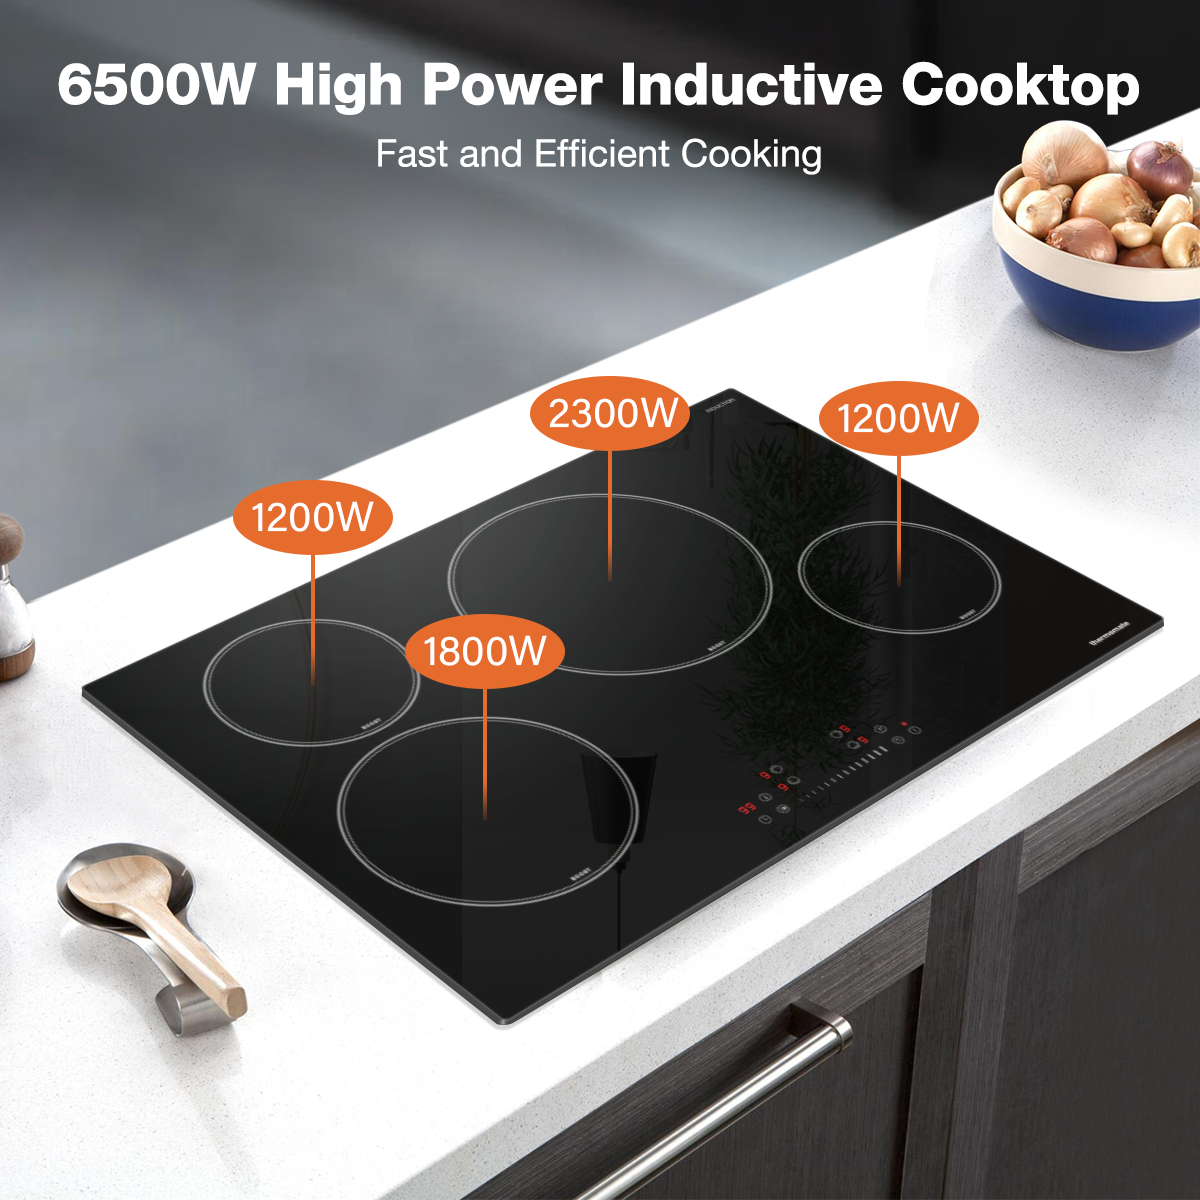 6500W High Power Inductive Cooktop | Thermomate